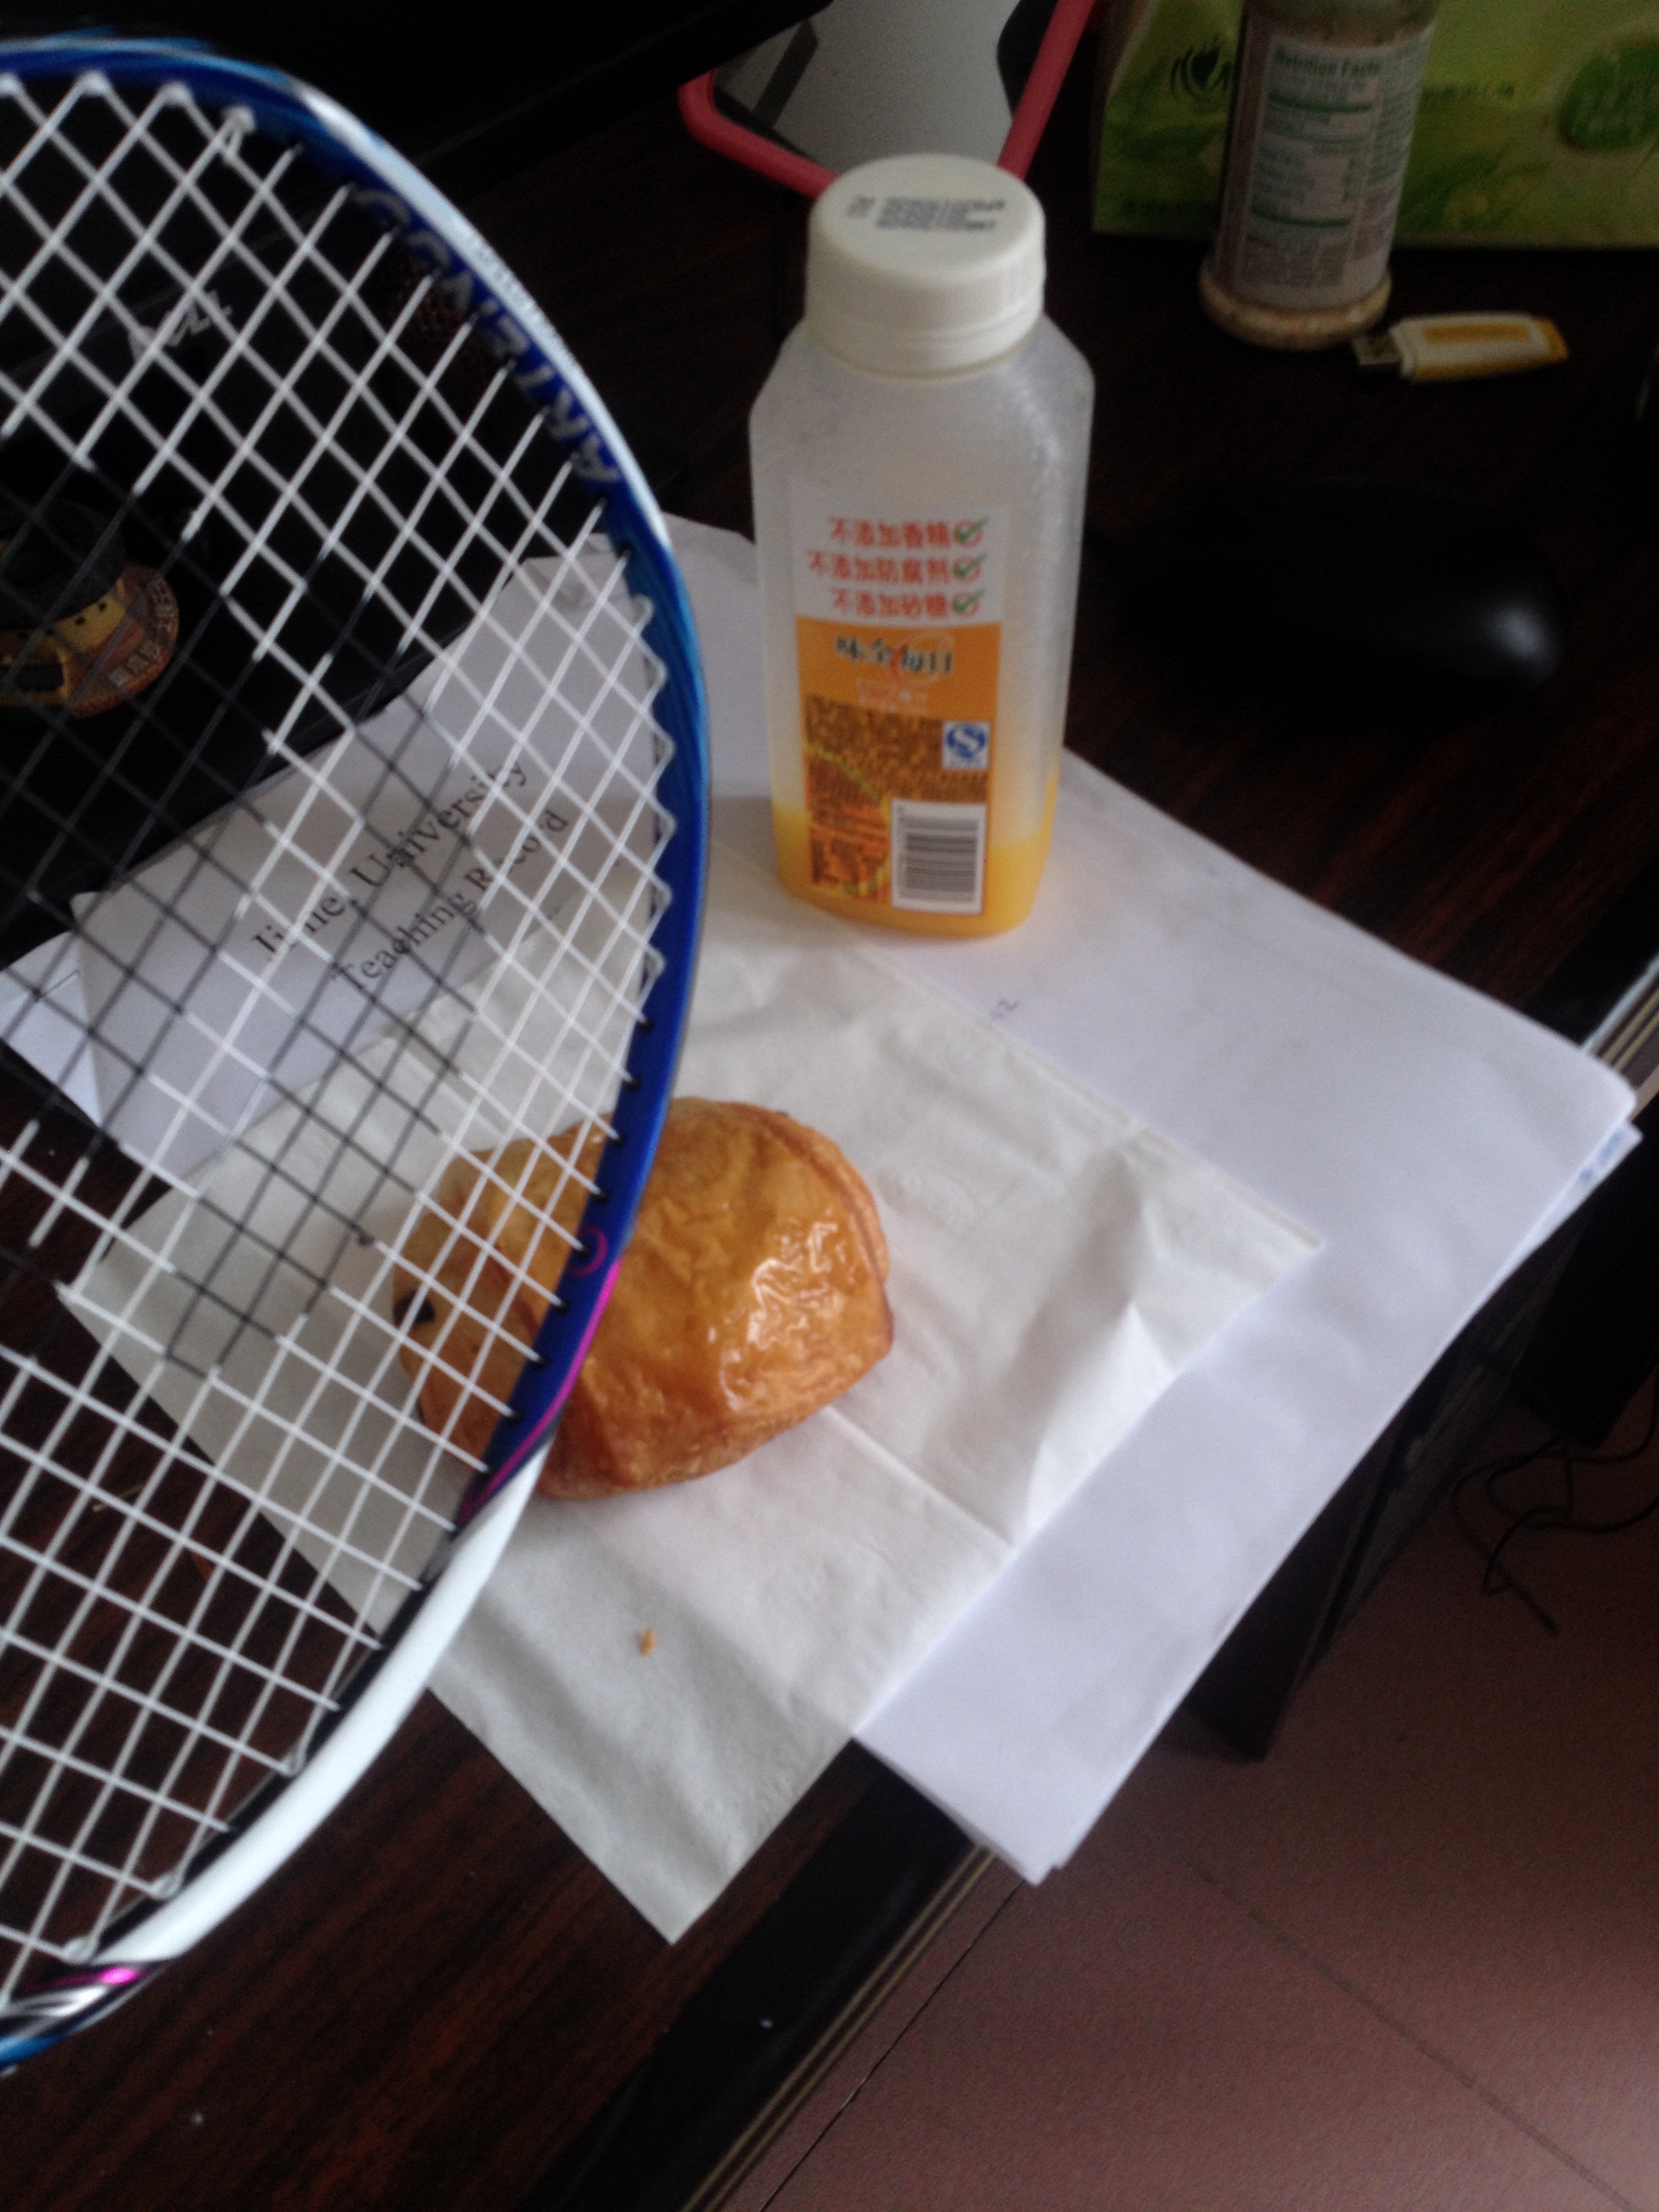 My racket likes getting a little snack while out and about in the city. 